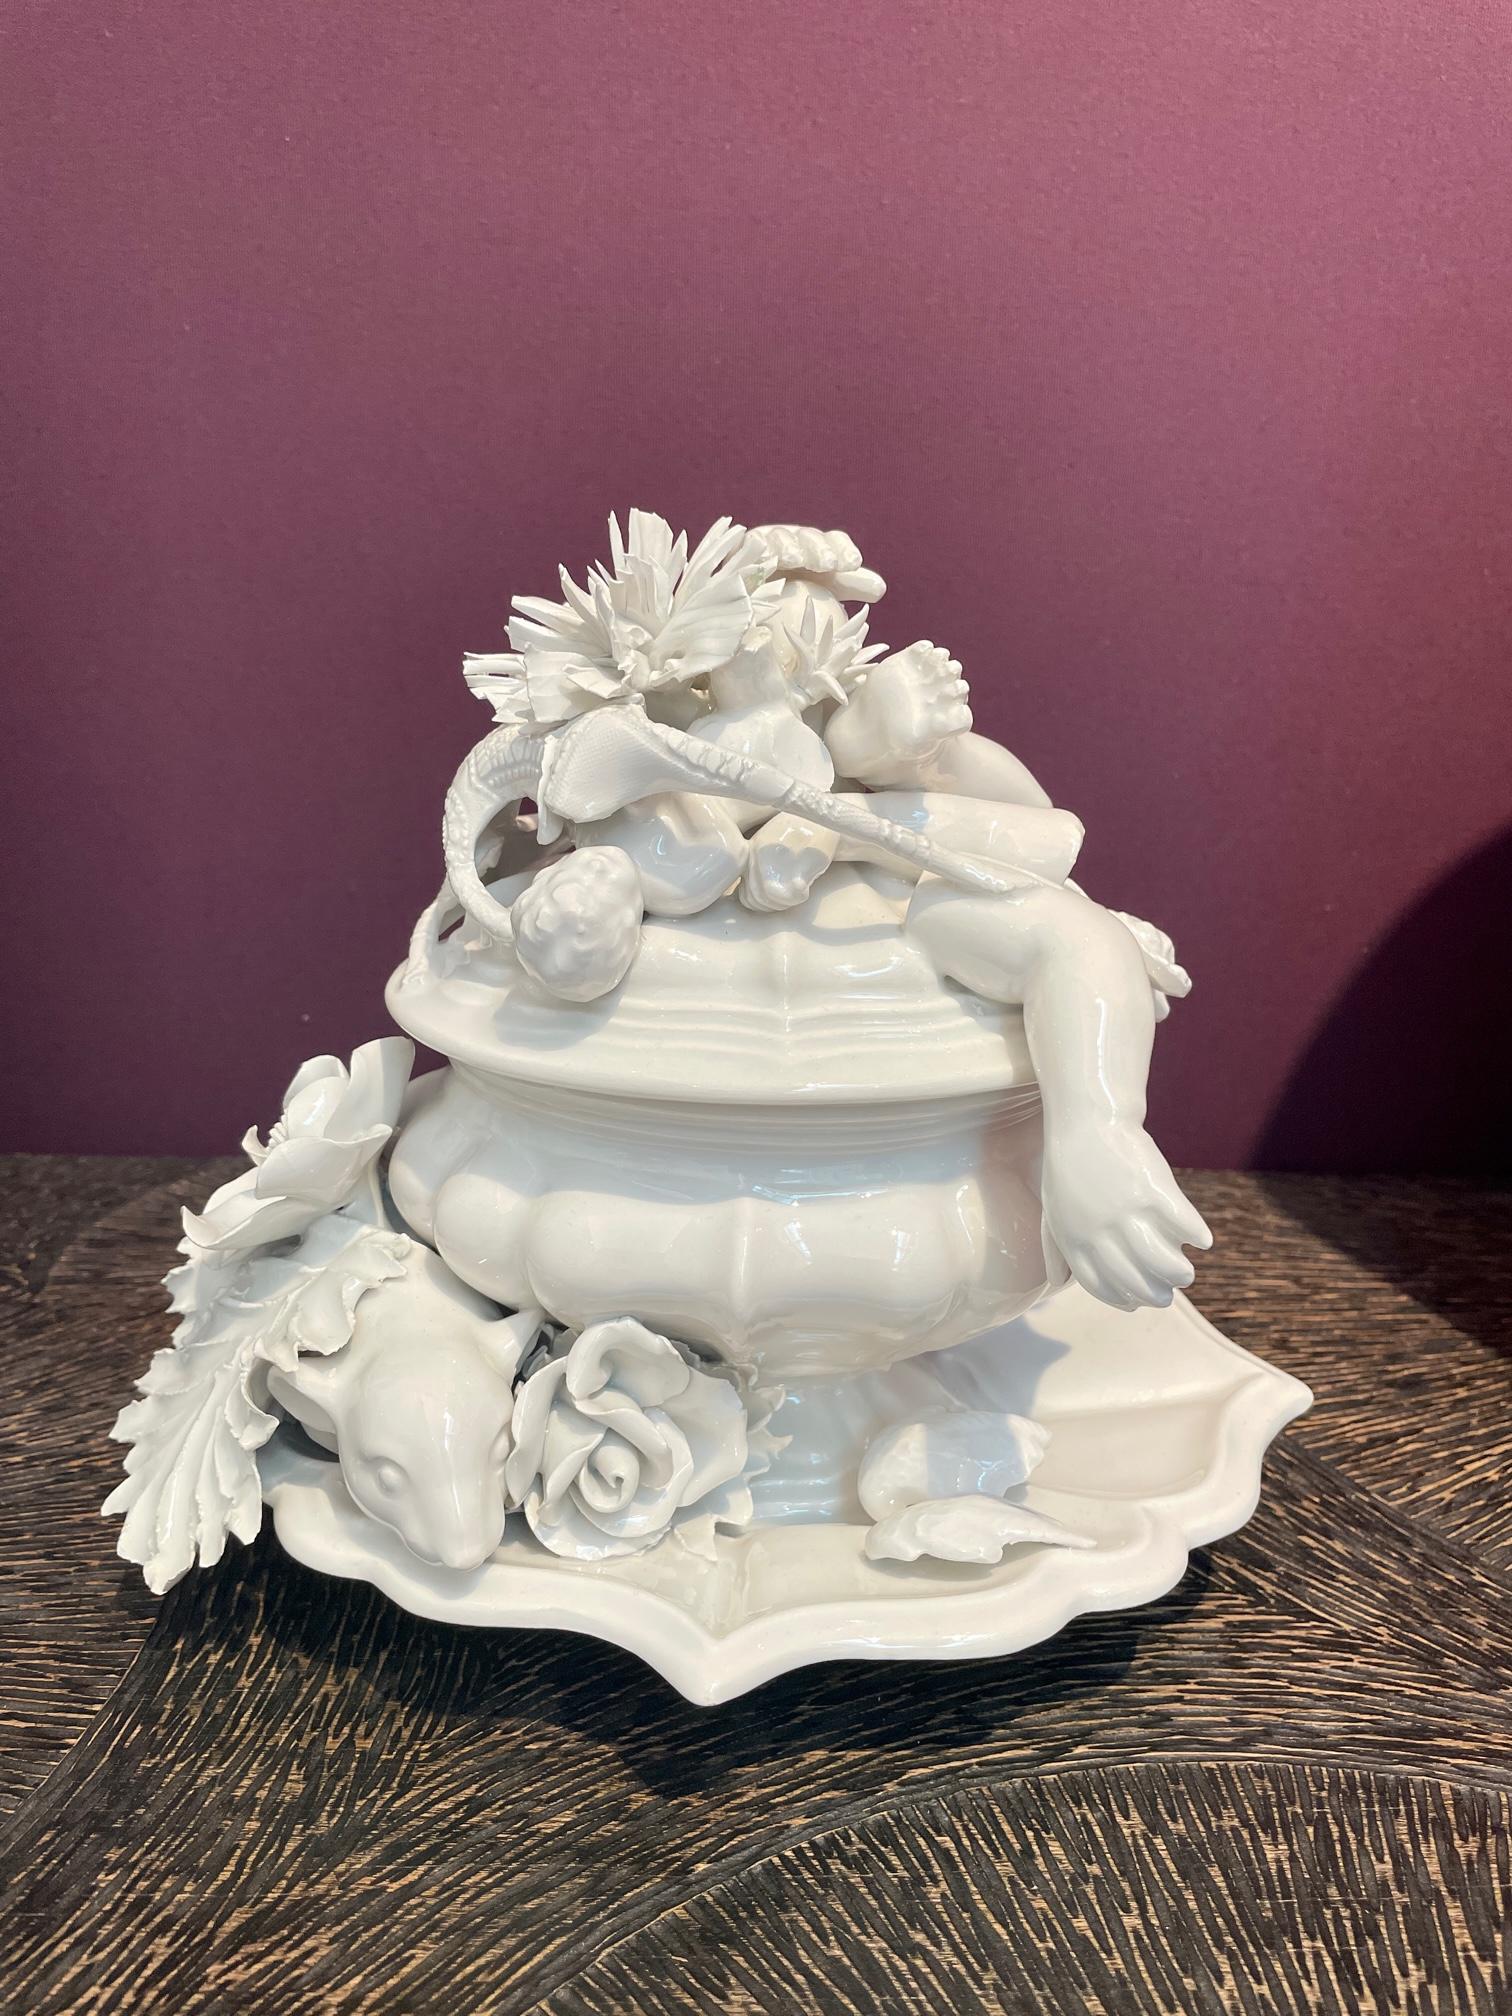 Baroque White Ceramic Sculpture by Renzi & Reale Glazed Earthenware Italy Contemporary For Sale